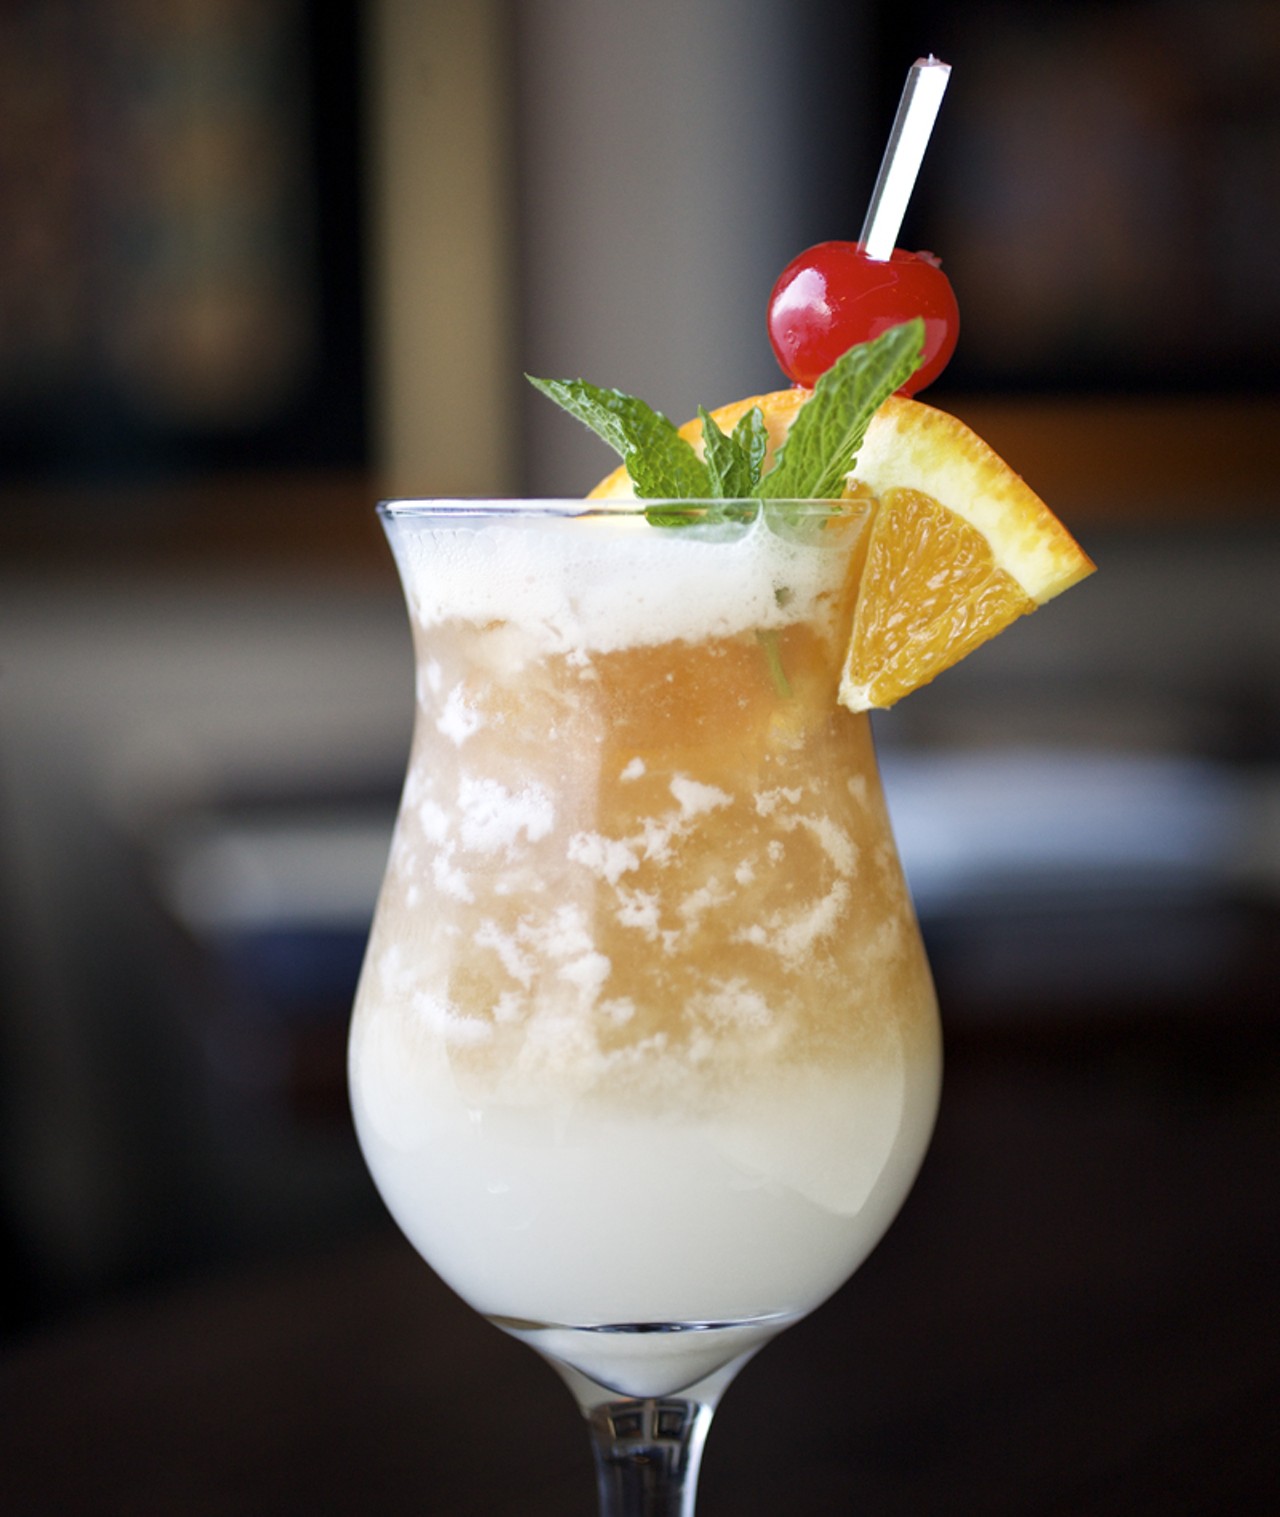 The Mai Tai, as mixed by Matt Seiter, is Flor de Cana White Rum, house made macadamia nut syrup, fresh lime juice and Ron Zacapa 23-year old rum.